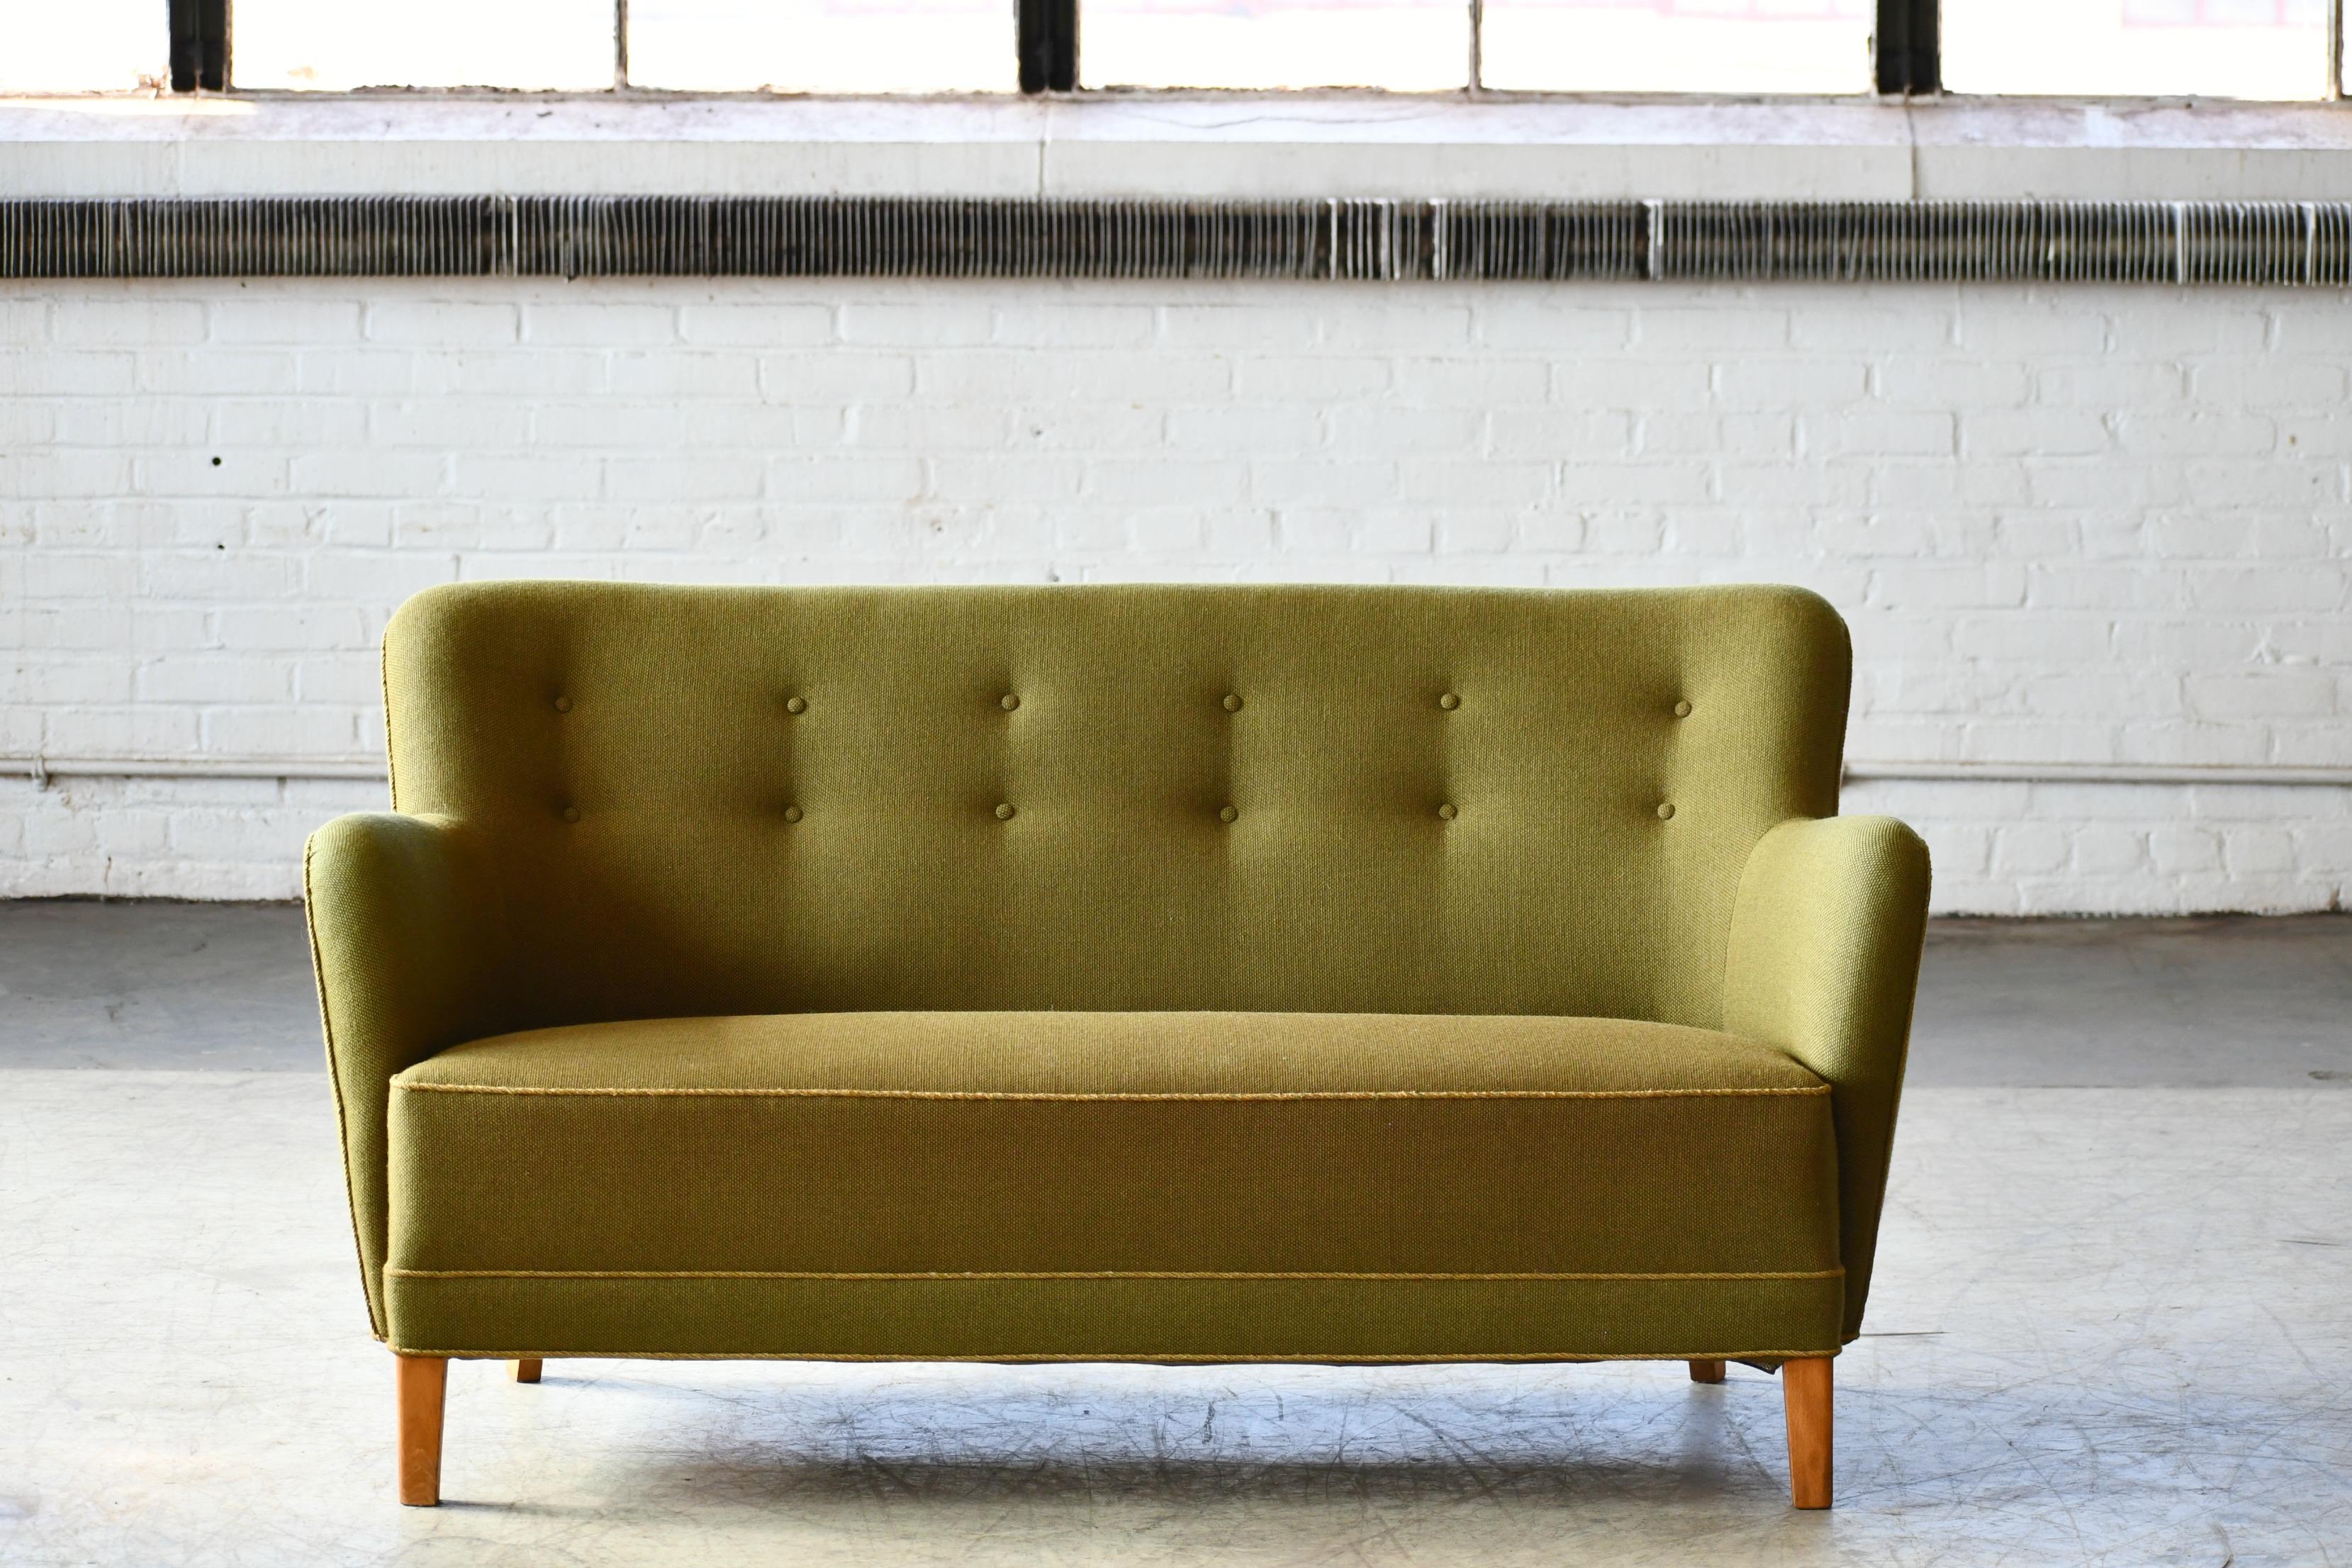 Superbly elegant Finn Juhl style sofa or settee made by Slagelse Mobelvaerk, Denmark sometime in the 1940s. Perfectly balanced lines and proportions providing for a solid and sturdy yet very elegant design. The sofa was re-upholstered in a nice